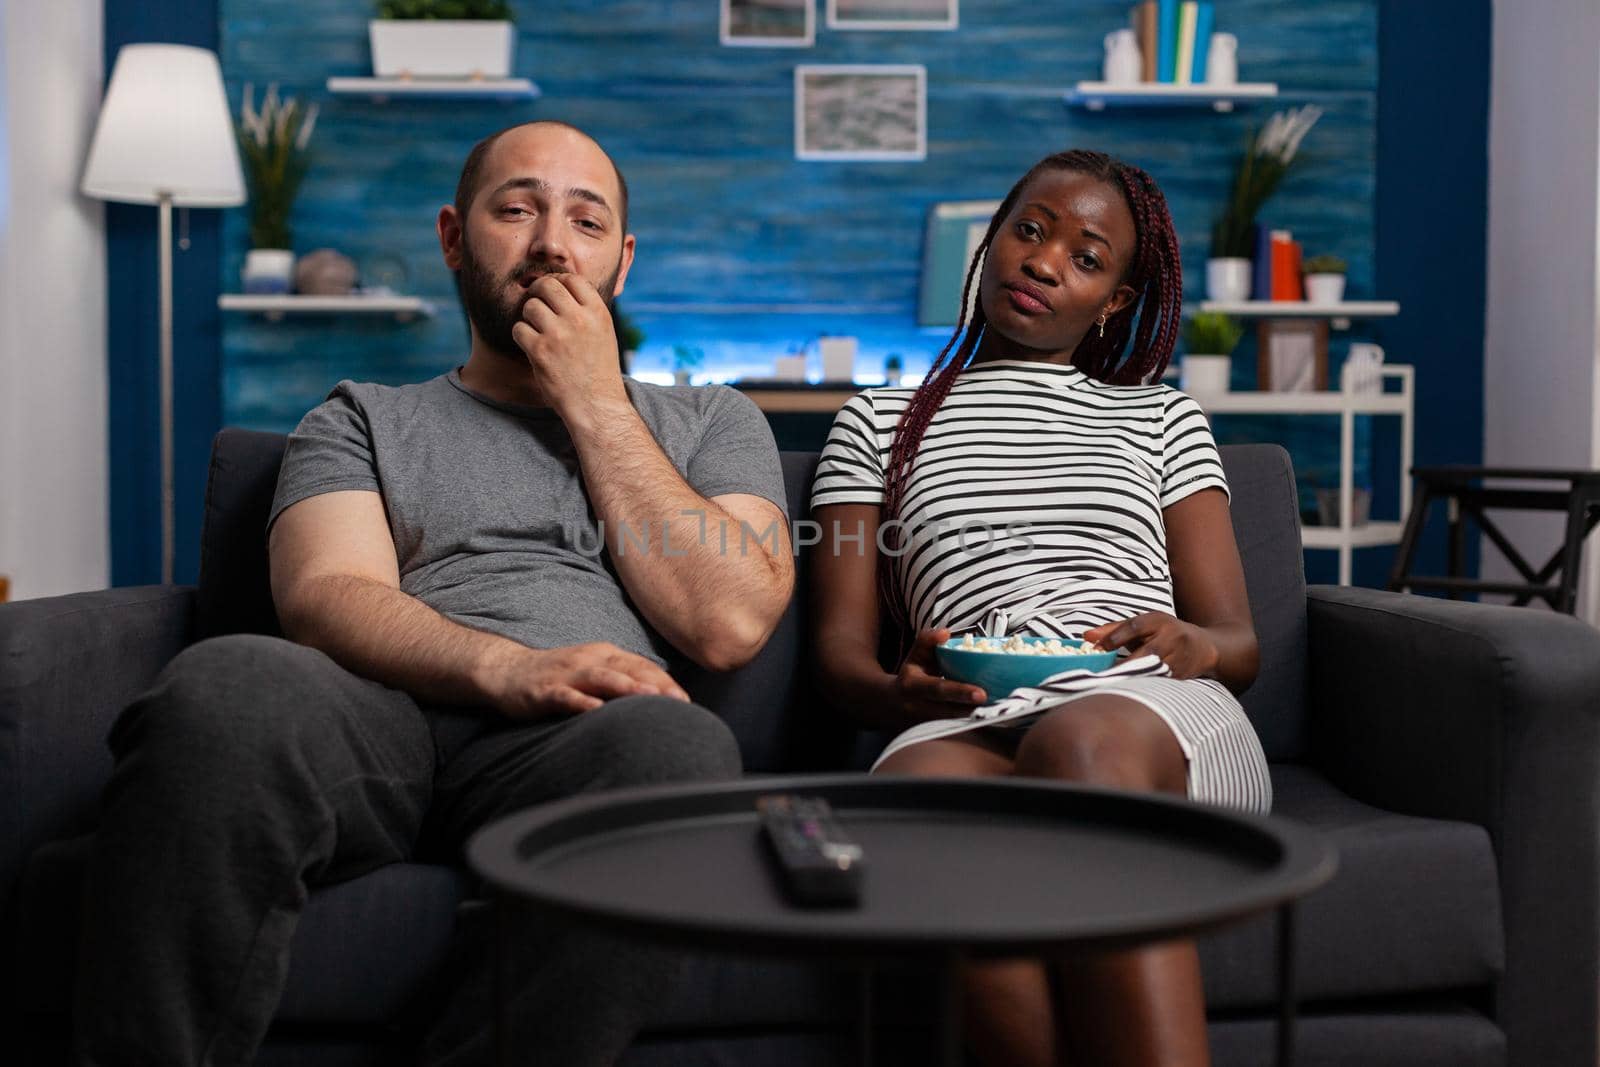 POV of interracial couple watching television enjoying activity in living room. African american woman and caucasian man looking at camera while bonding, relaxing and eating popcorn